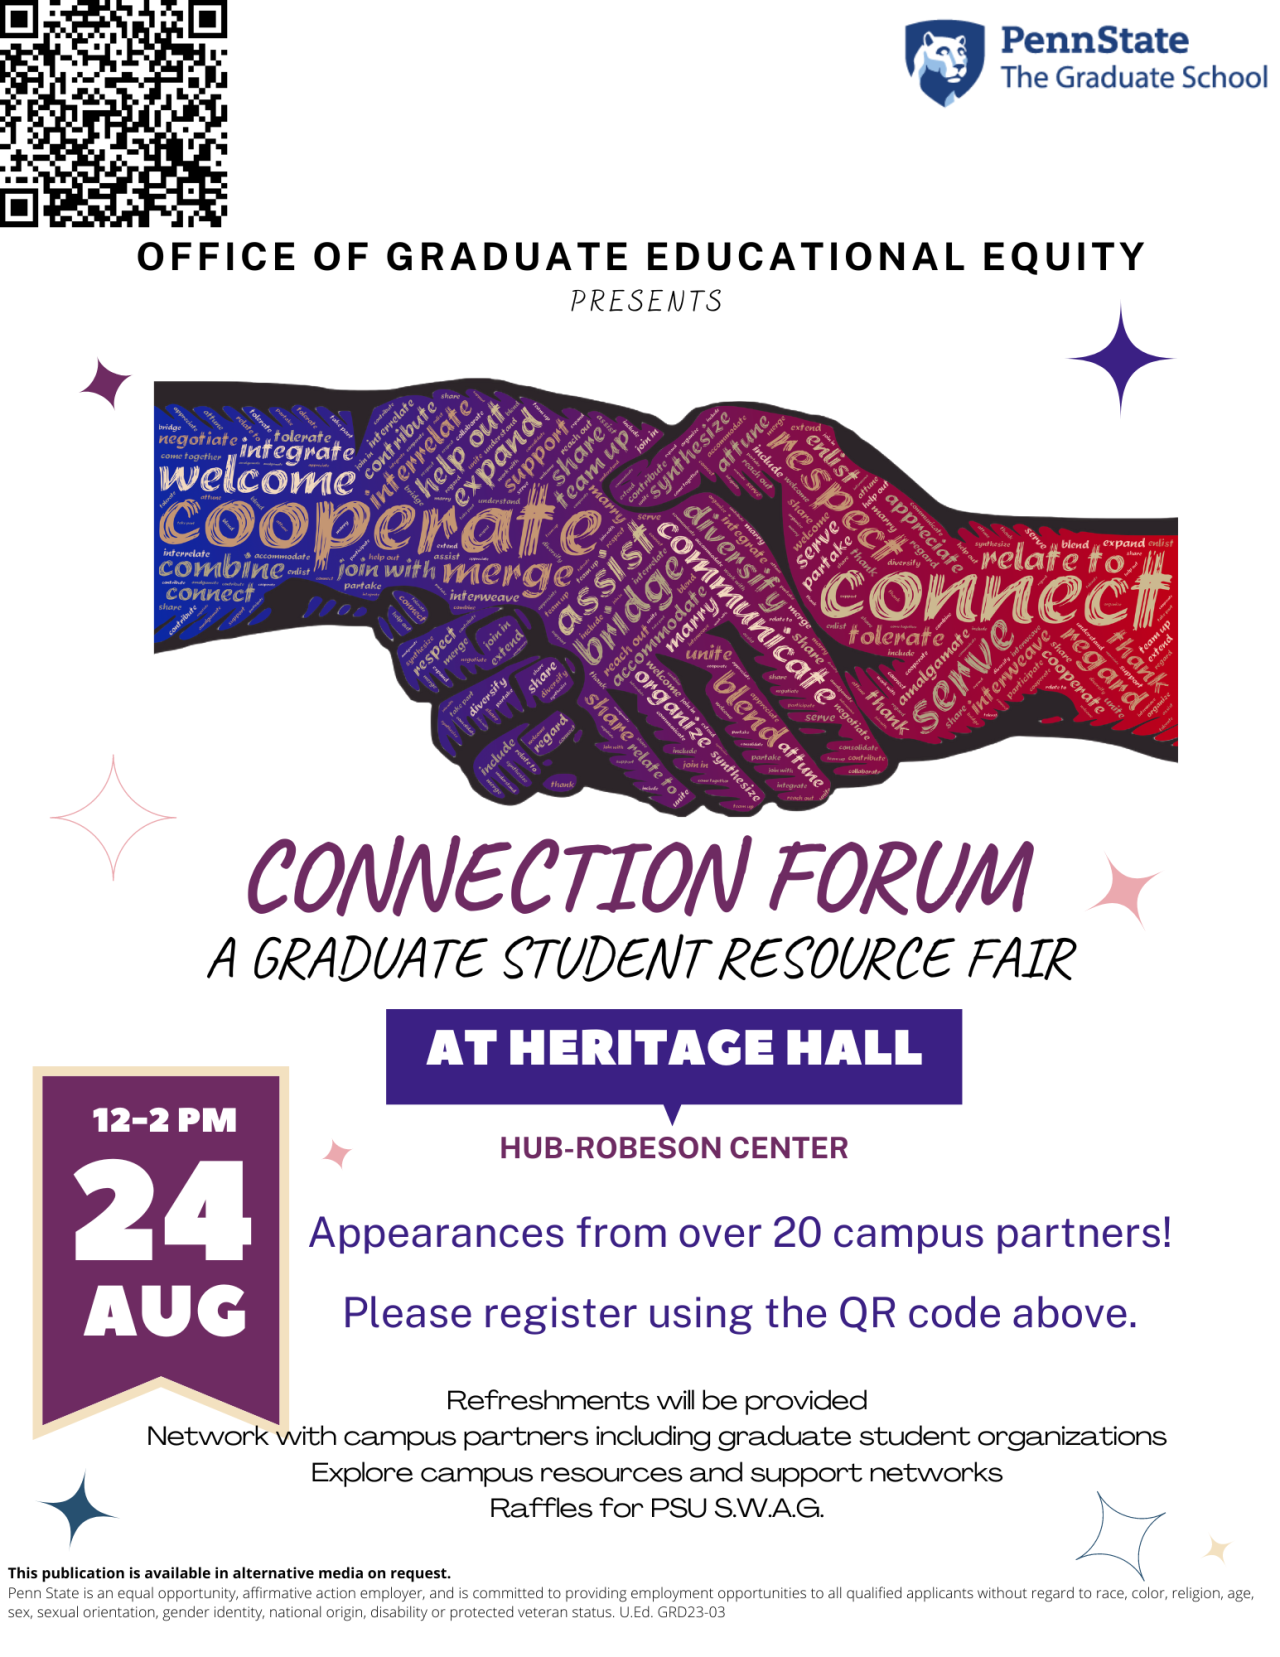 OGEEP Connections Forum Flyer